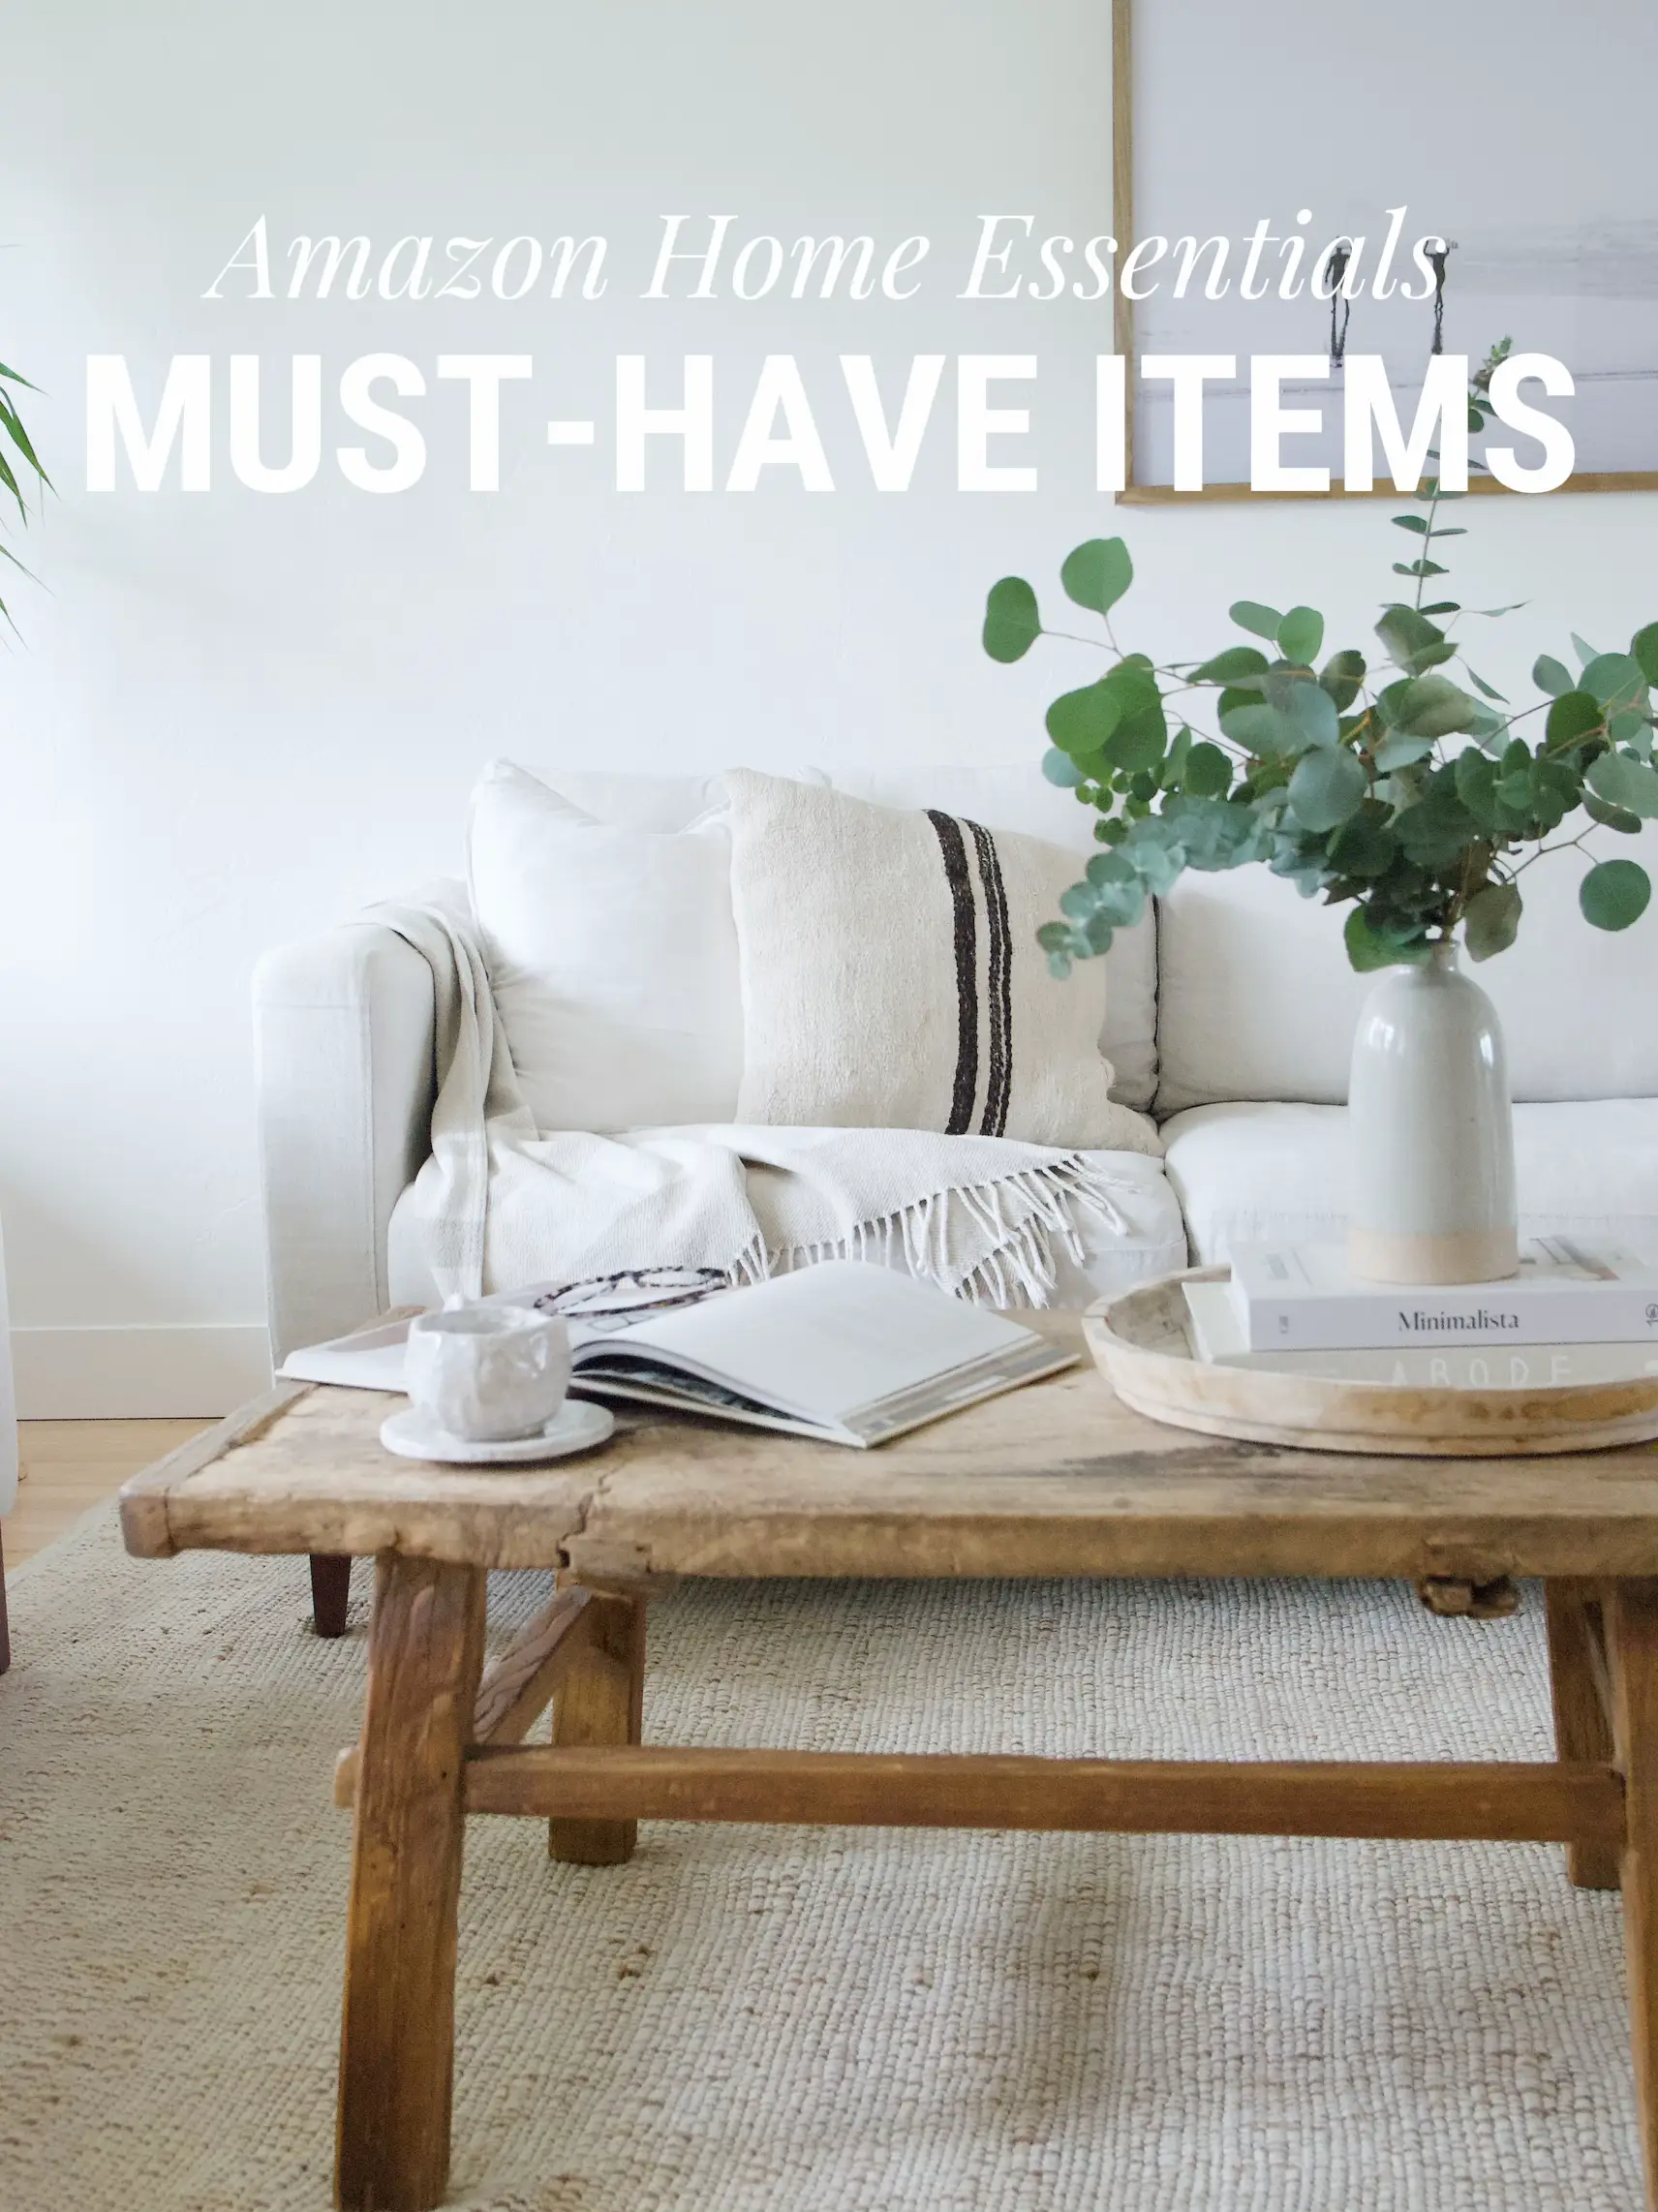 Home Essentials, Gallery posted by Jaime Scott